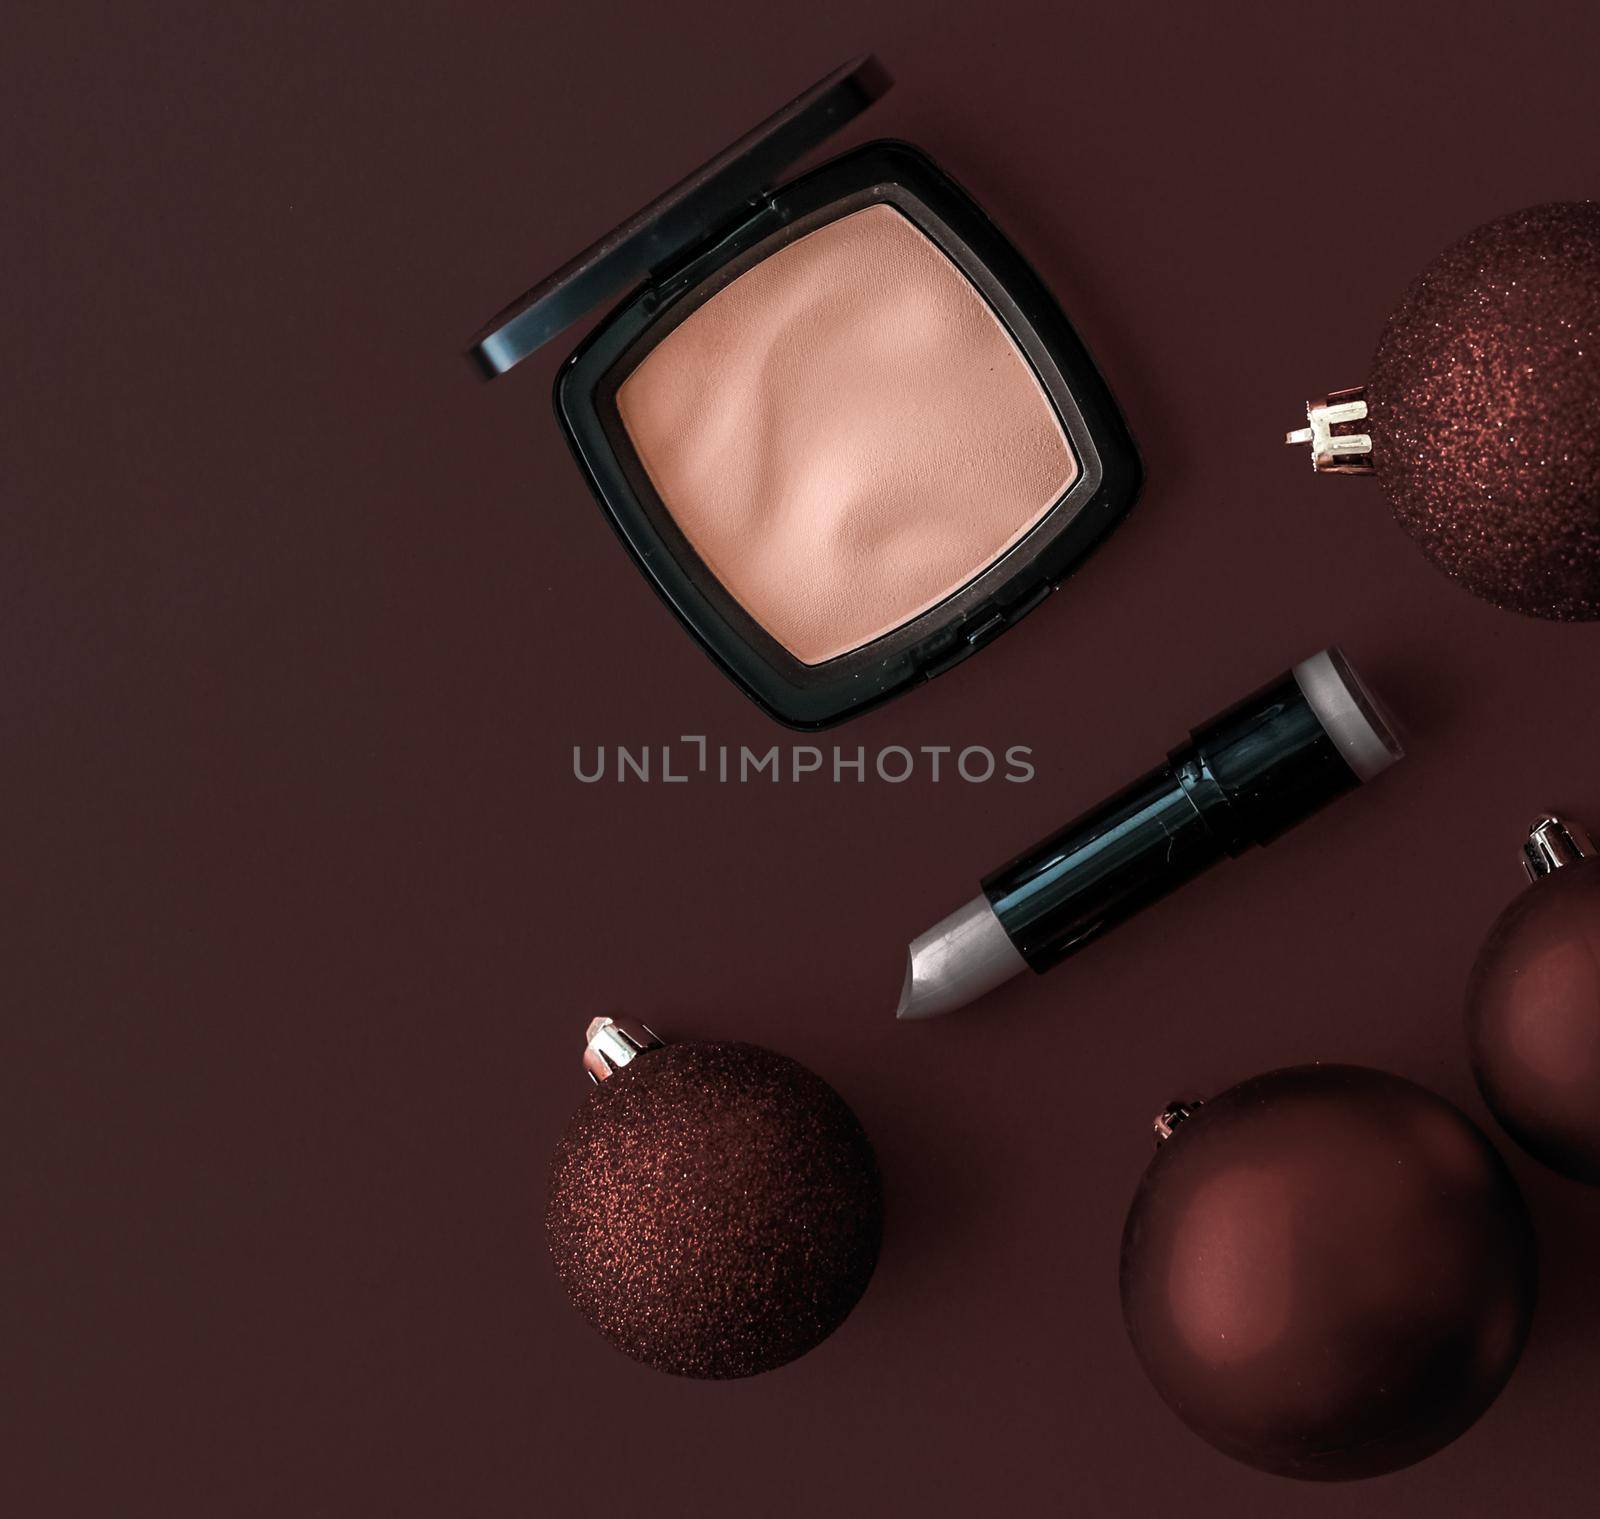 Make-up and cosmetics product set for beauty brand Christmas sale promotion, luxury chocolate flatlay background as holiday design by Anneleven